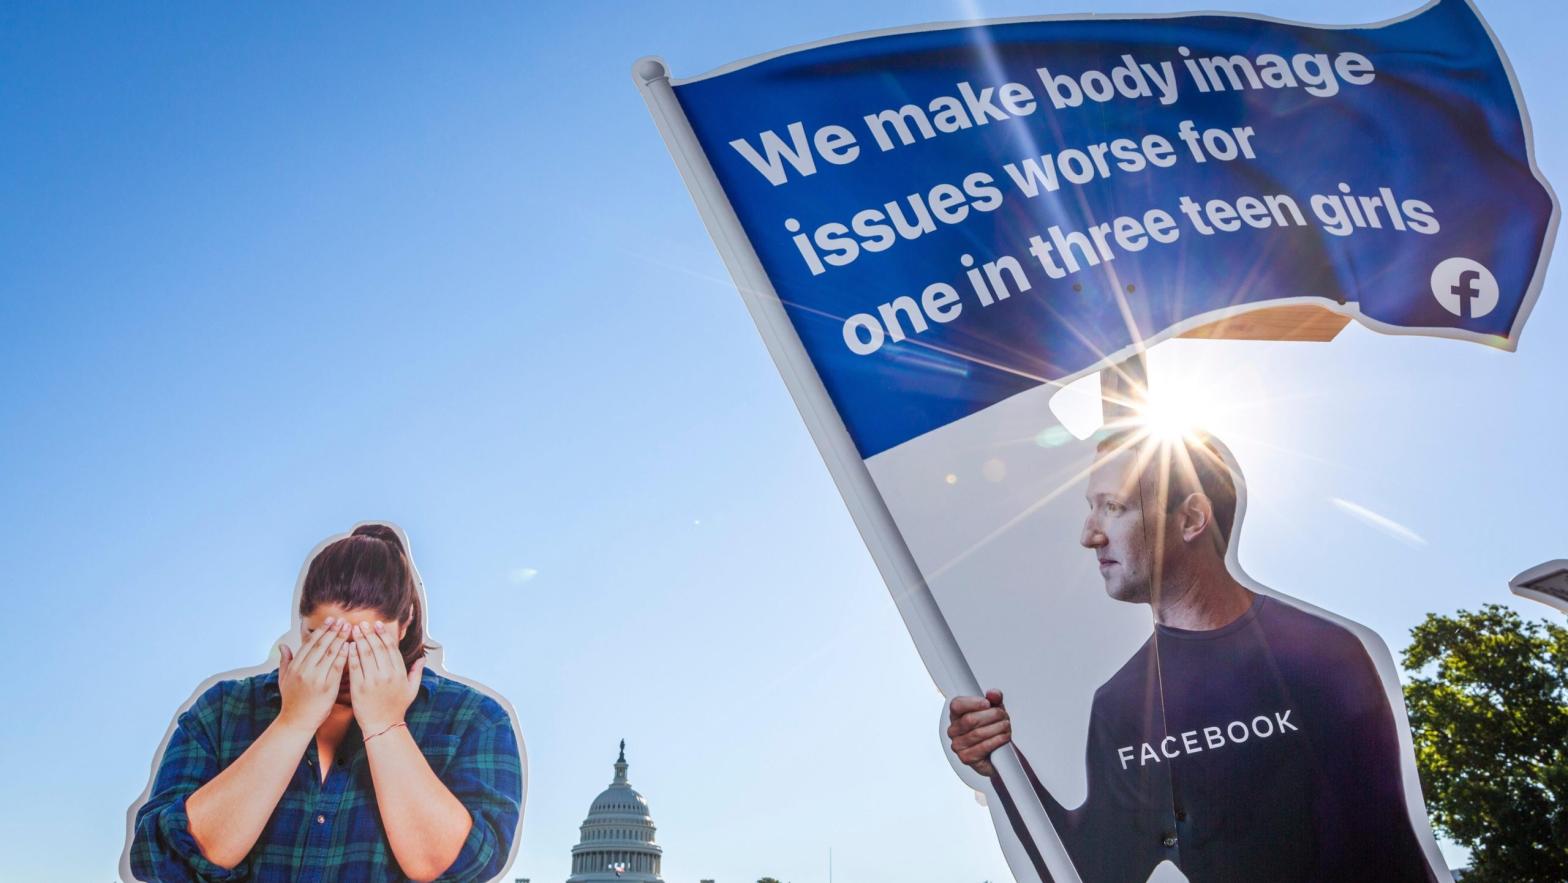 Nonprofit advocacy group SumOfUs erected a 7ft visual outside the US Capitol depicting Facebook CEO Mark Zuckerberg surfing on a wave of cash while young women around him appear to be suffering Thursday, Sept. 30, 2021, in Washington. (Photo: Eric Kayne/AP Images for SumOfUs, AP)